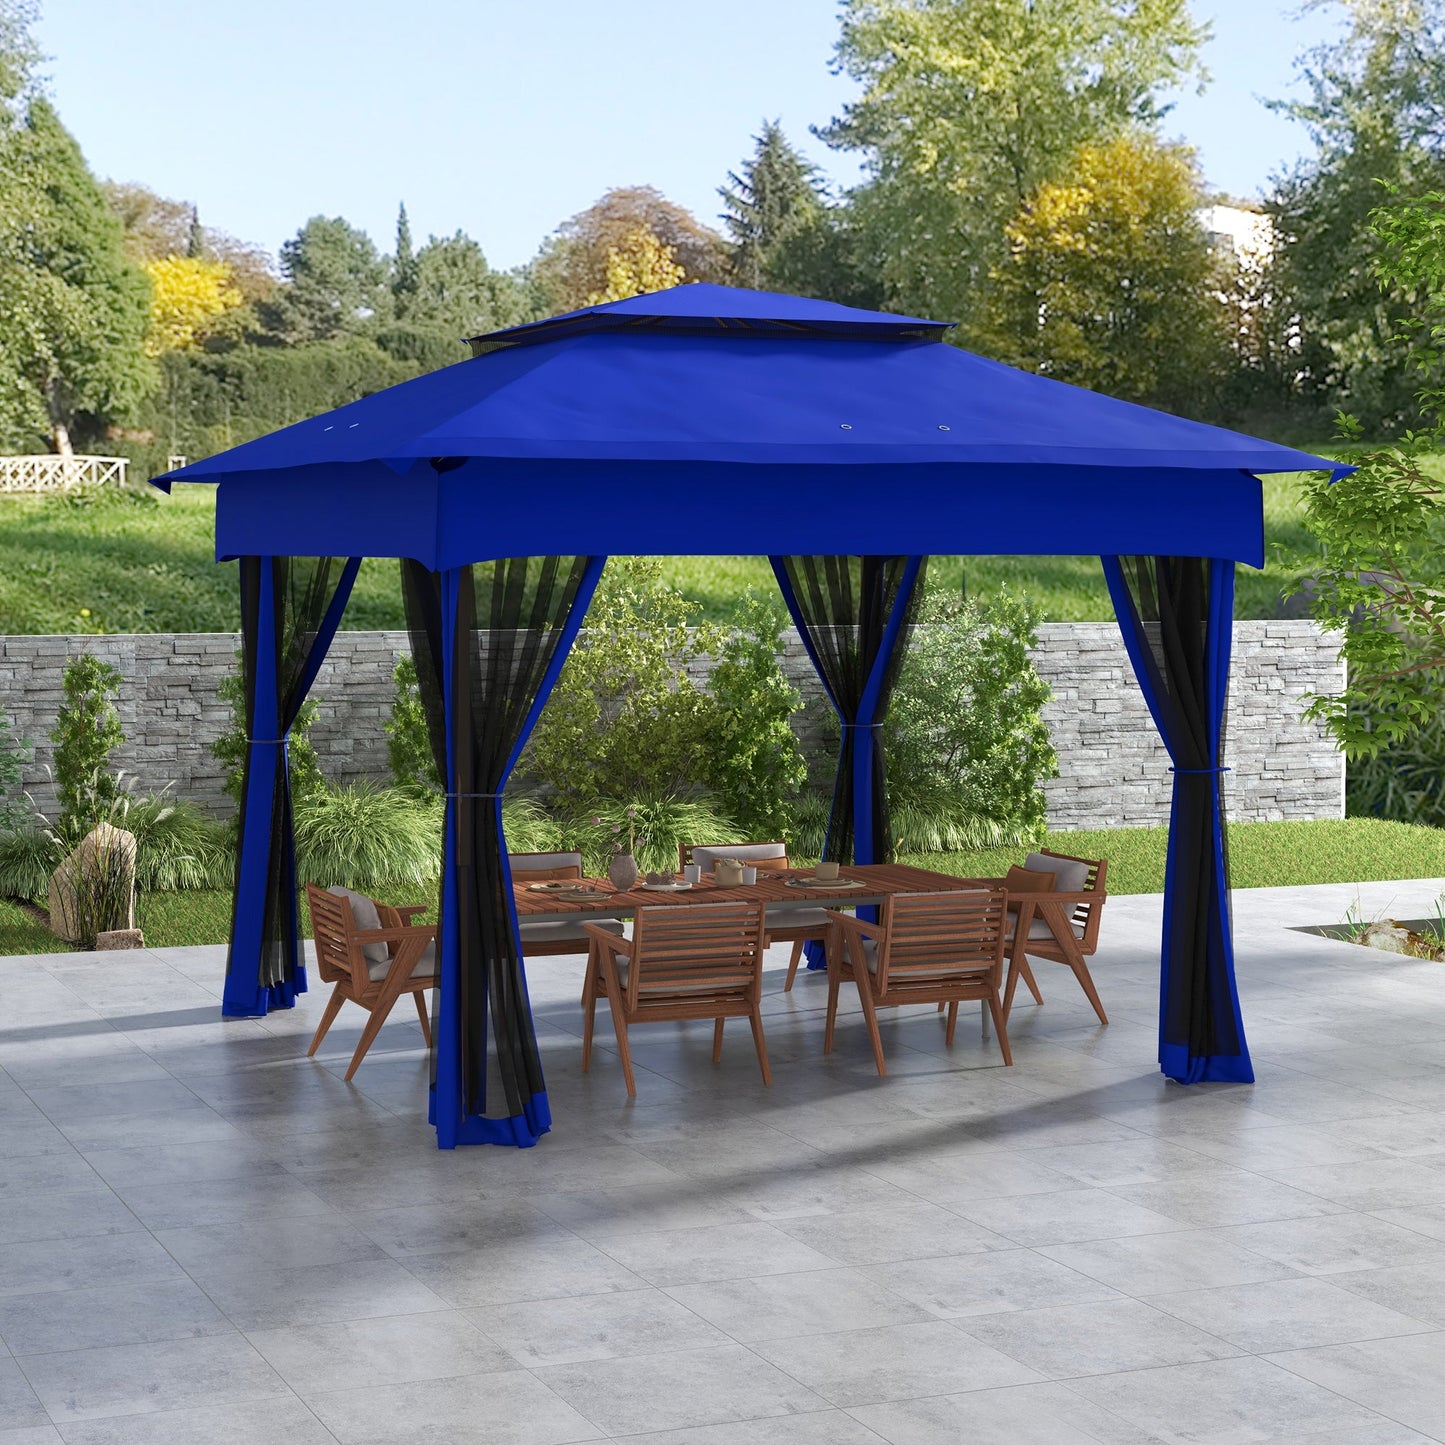 -Outsunny 11' x 11' Pop Up Canopy Outdoor Patio Gazebo Event Tent with Zipper Netting, Carry Bag for Backyard, Garden, Blue - Outdoor Style Company